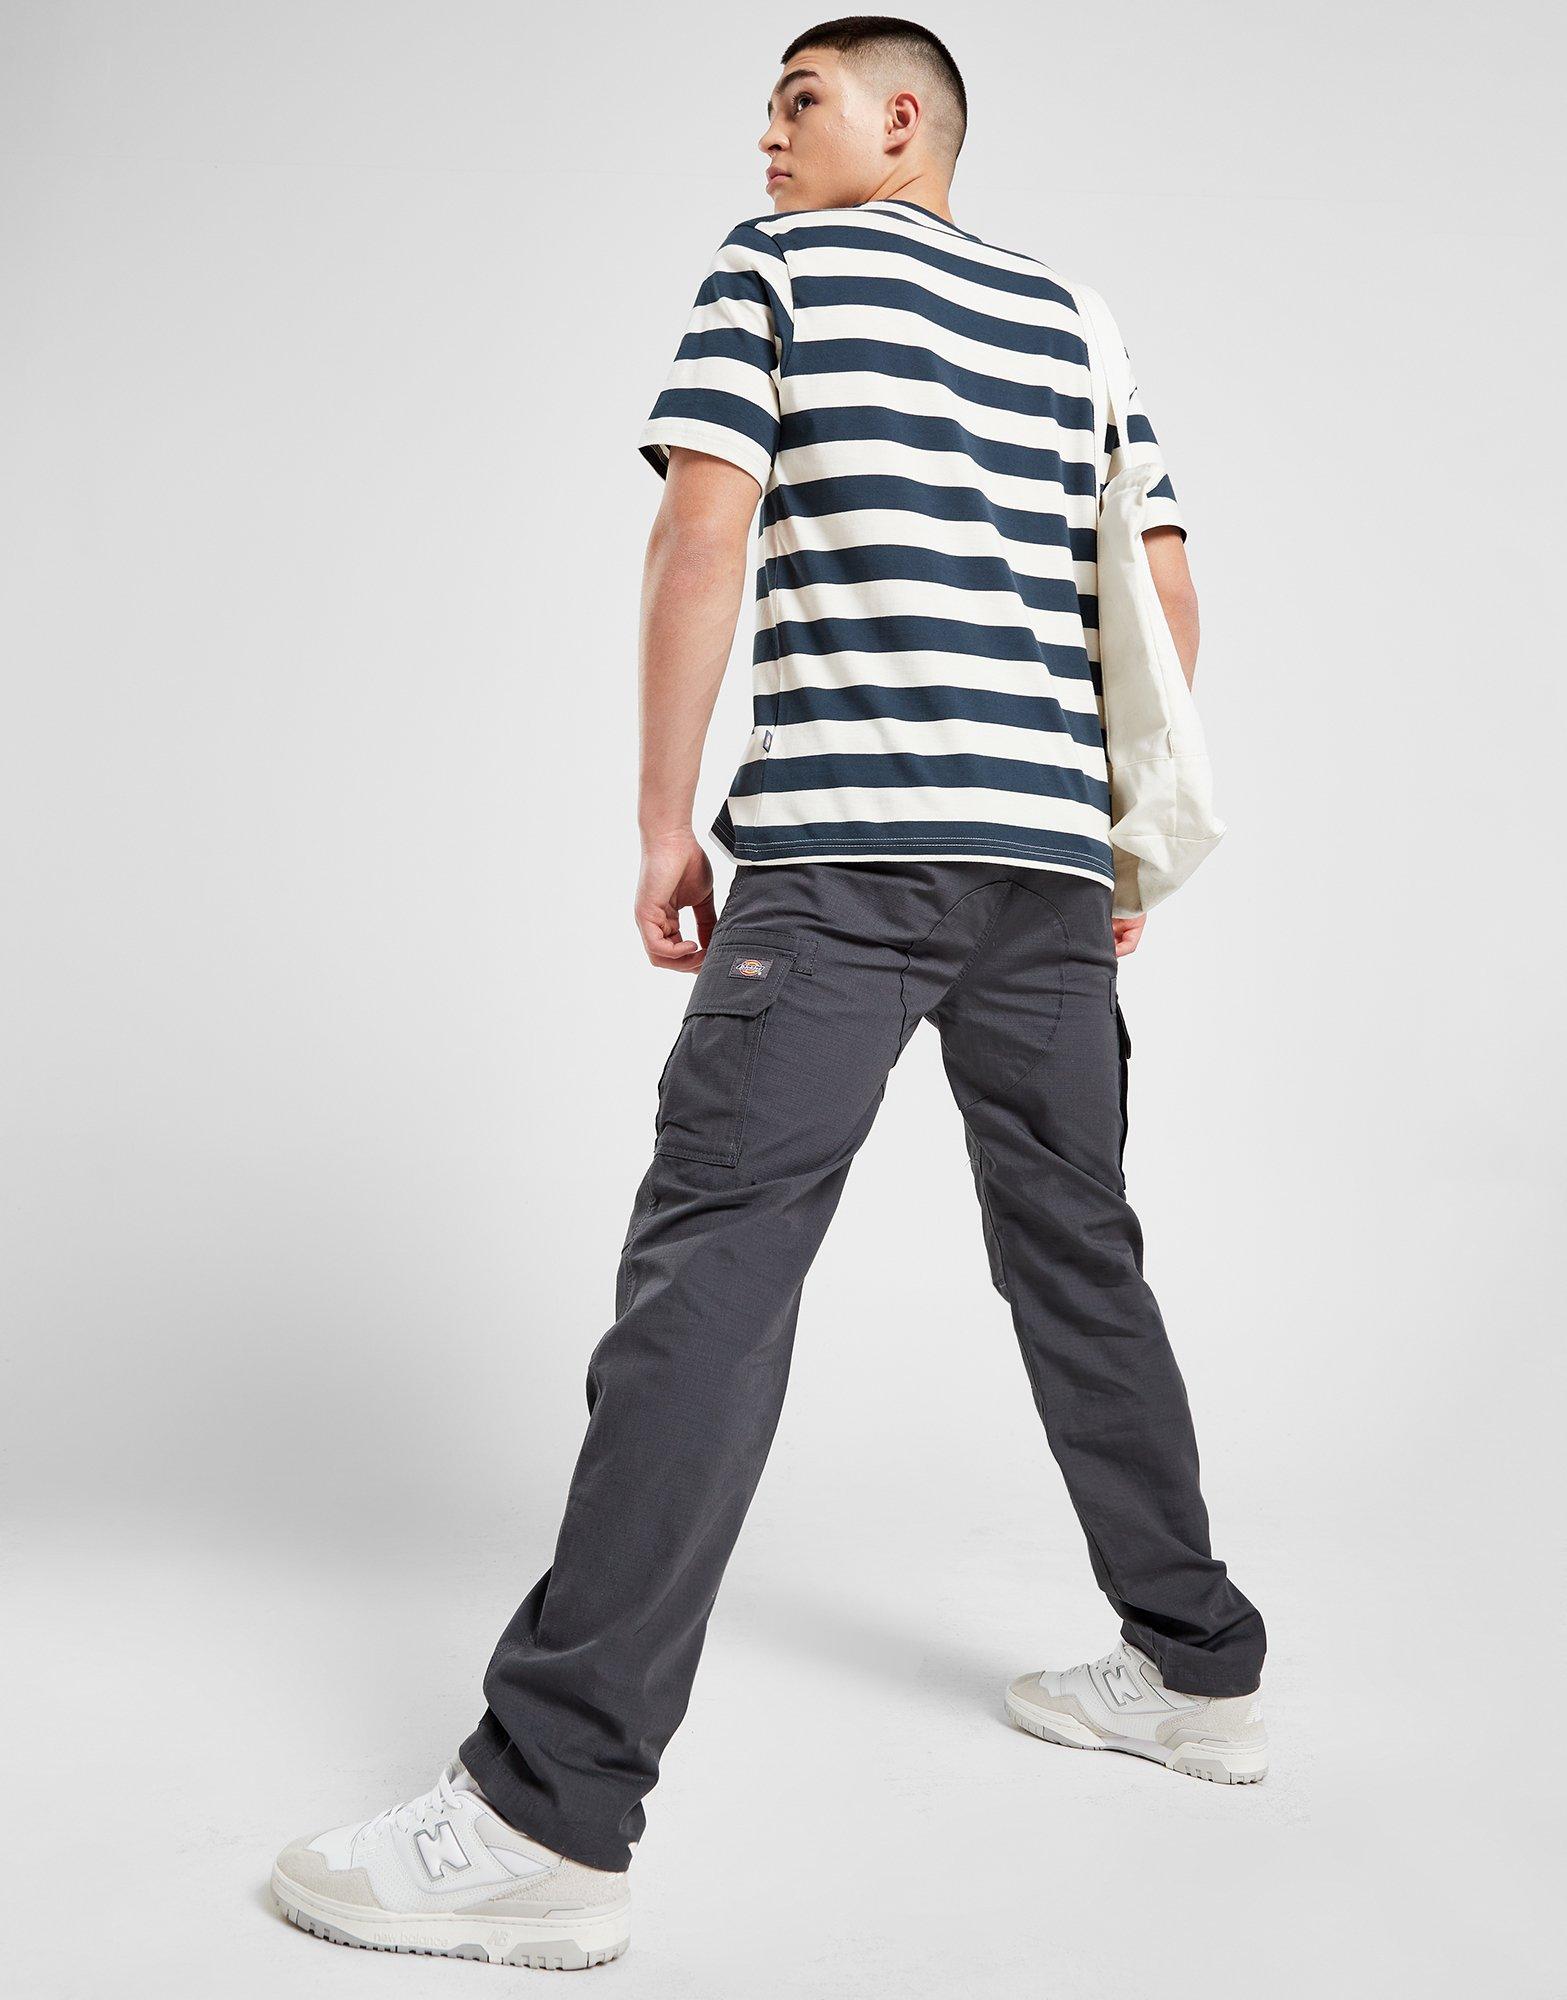 Clothing & Shoes - Bottoms - Pants - Mr. Max Signature Modern